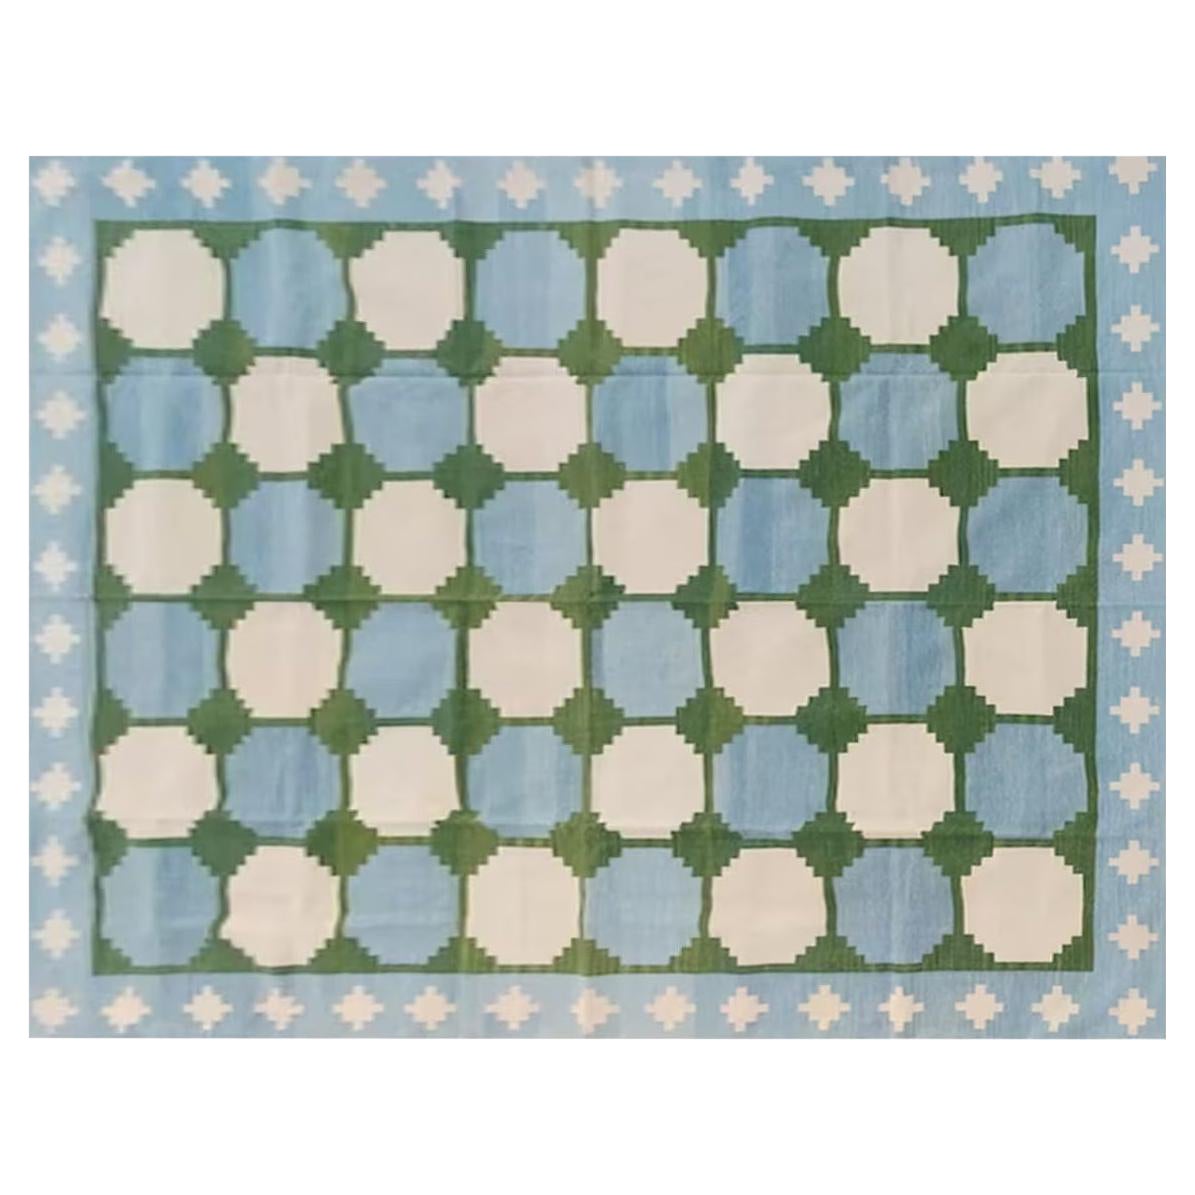 Handmade Cotton Area Flat Weave Rug, 8x10 Green And Blue Tile Indian Dhurrie Rug For Sale